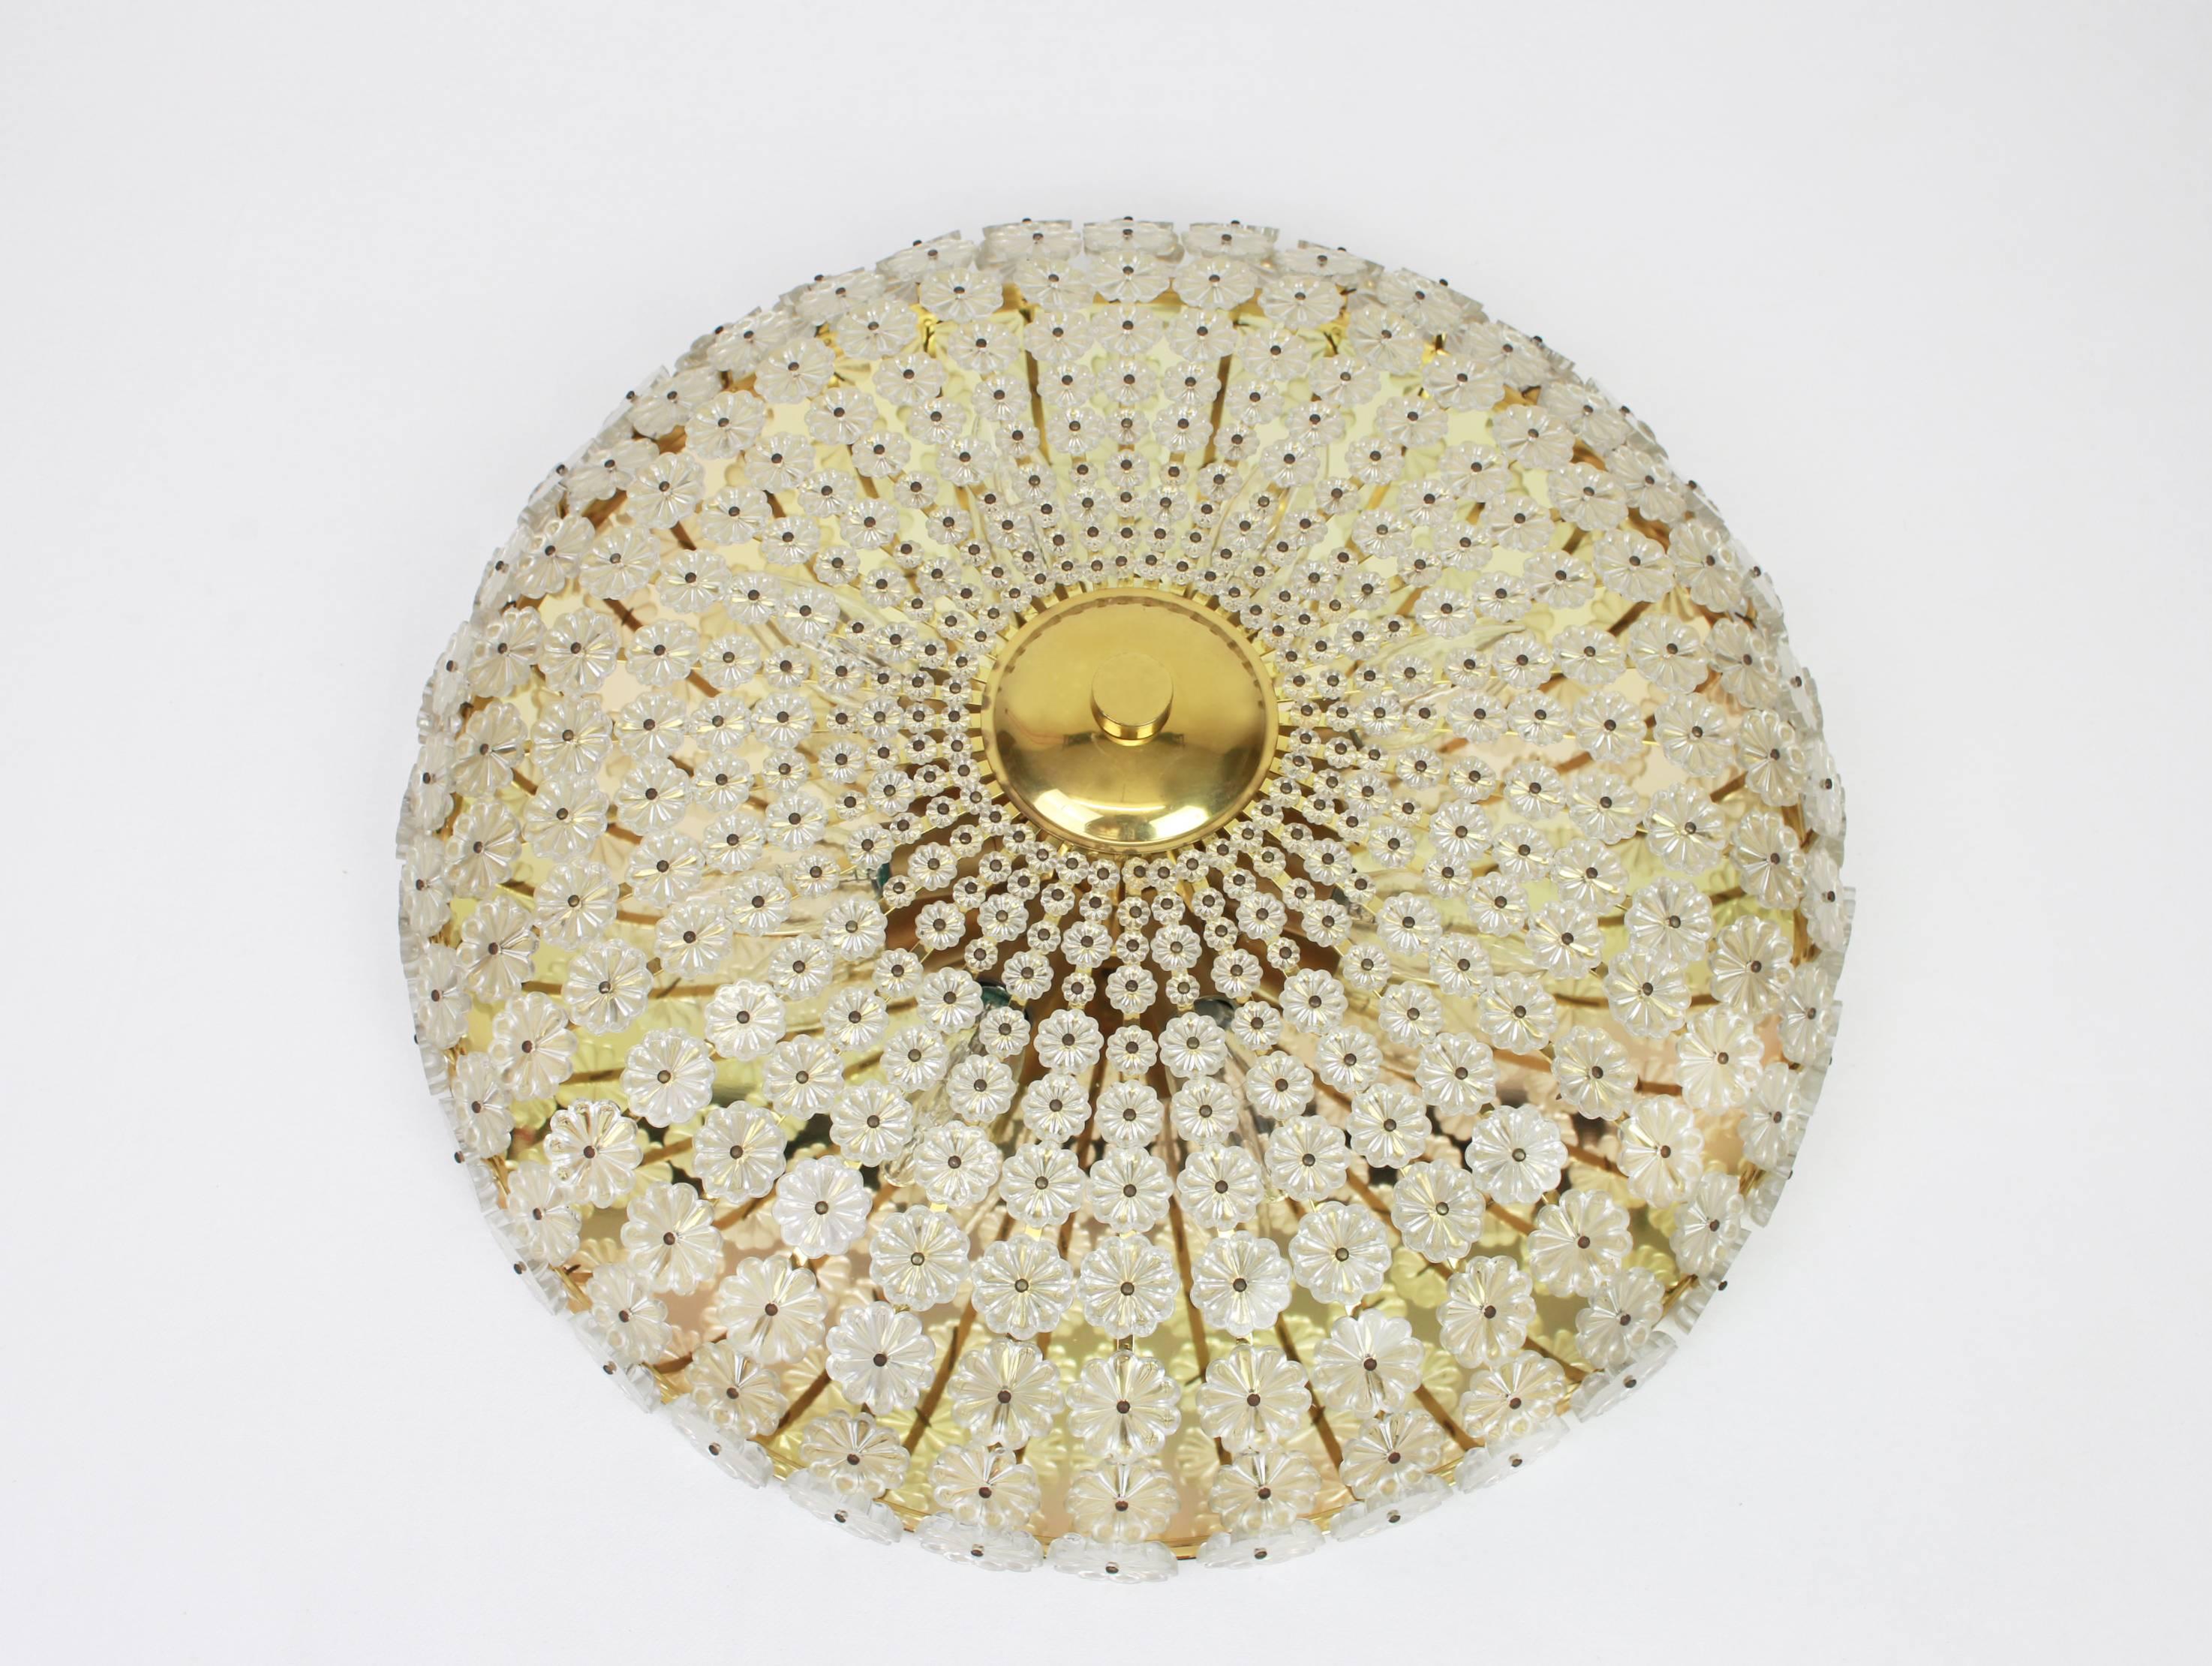 Large flower shaped flush mount designed by Emil Stejnar in Austria, 1960s.
It features a brass frame with hundreds of crystal glasses surrounding the frame creating a spectacular flower form design.

High quality and in very good condition.